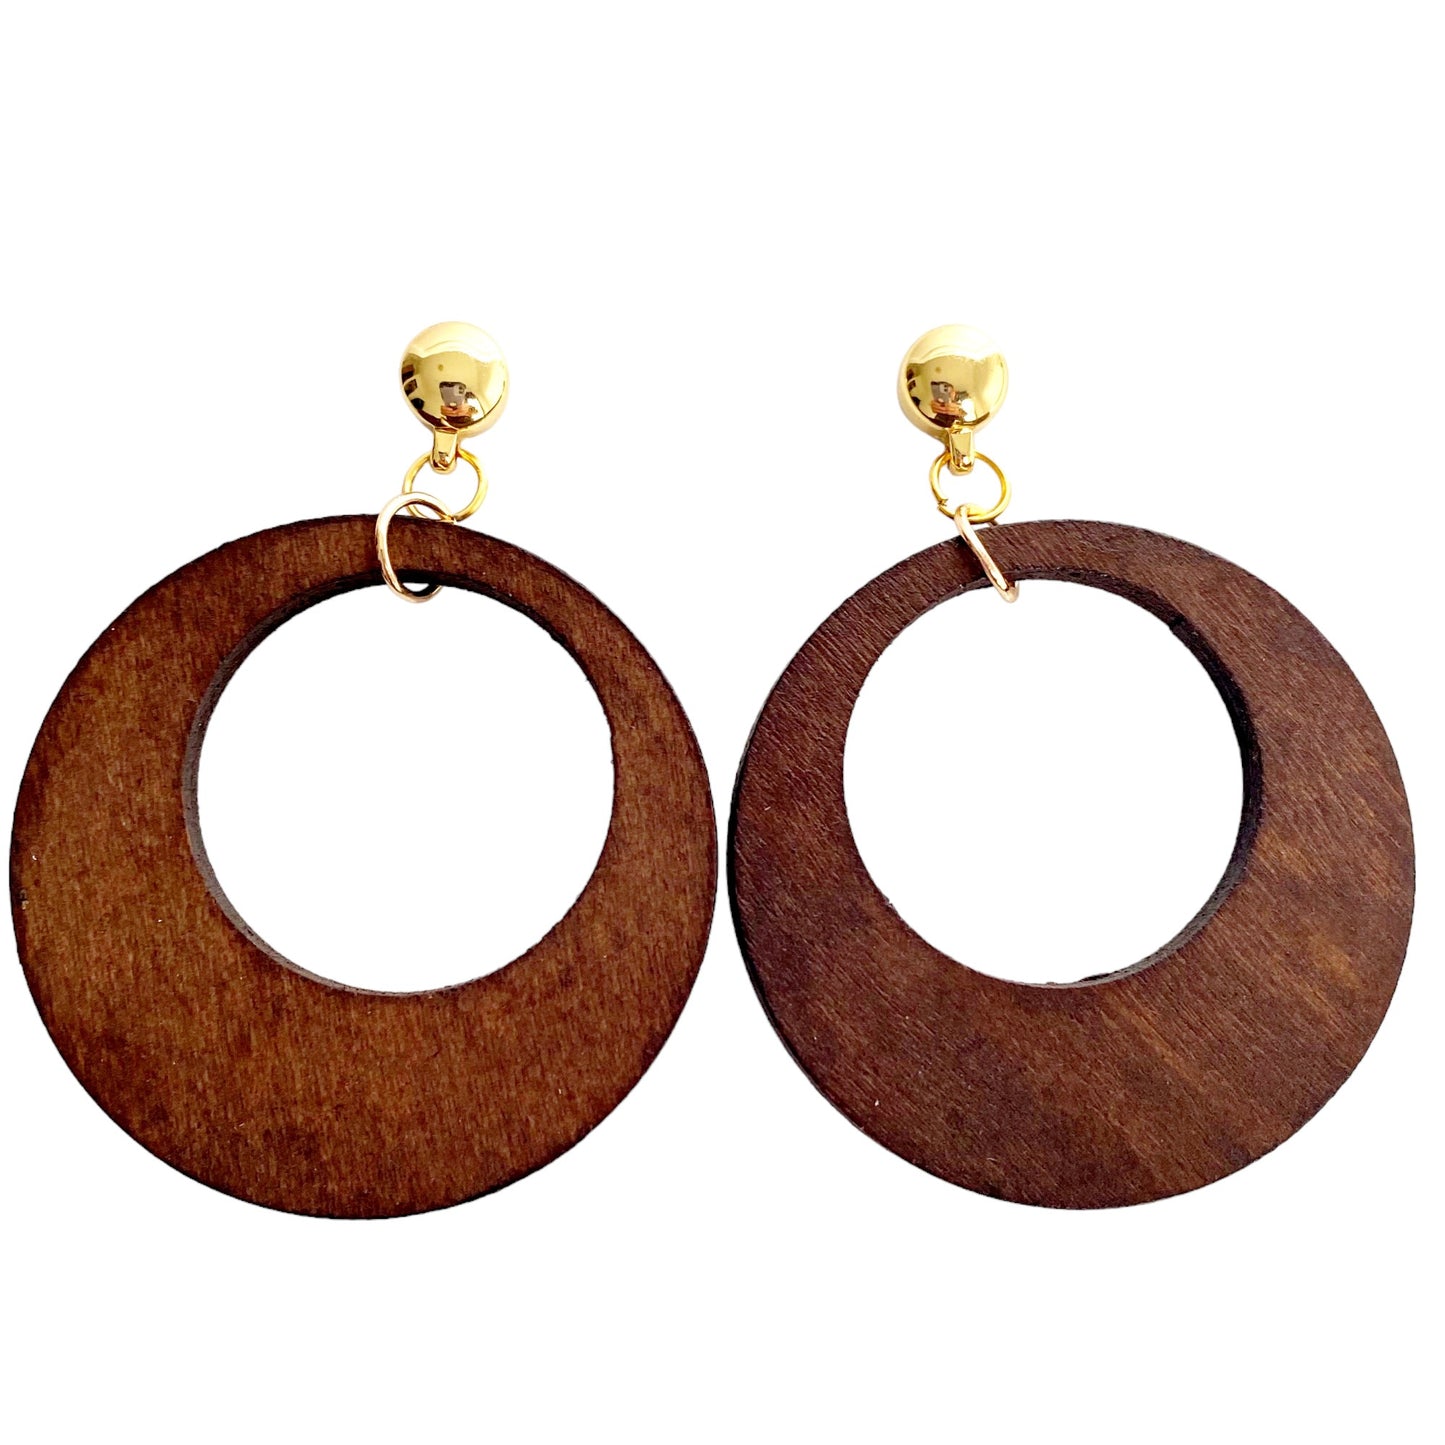 TI-GO Hanging wooden hoop. Detachable earrings for a truly hypoallergenic jewellery on a white background